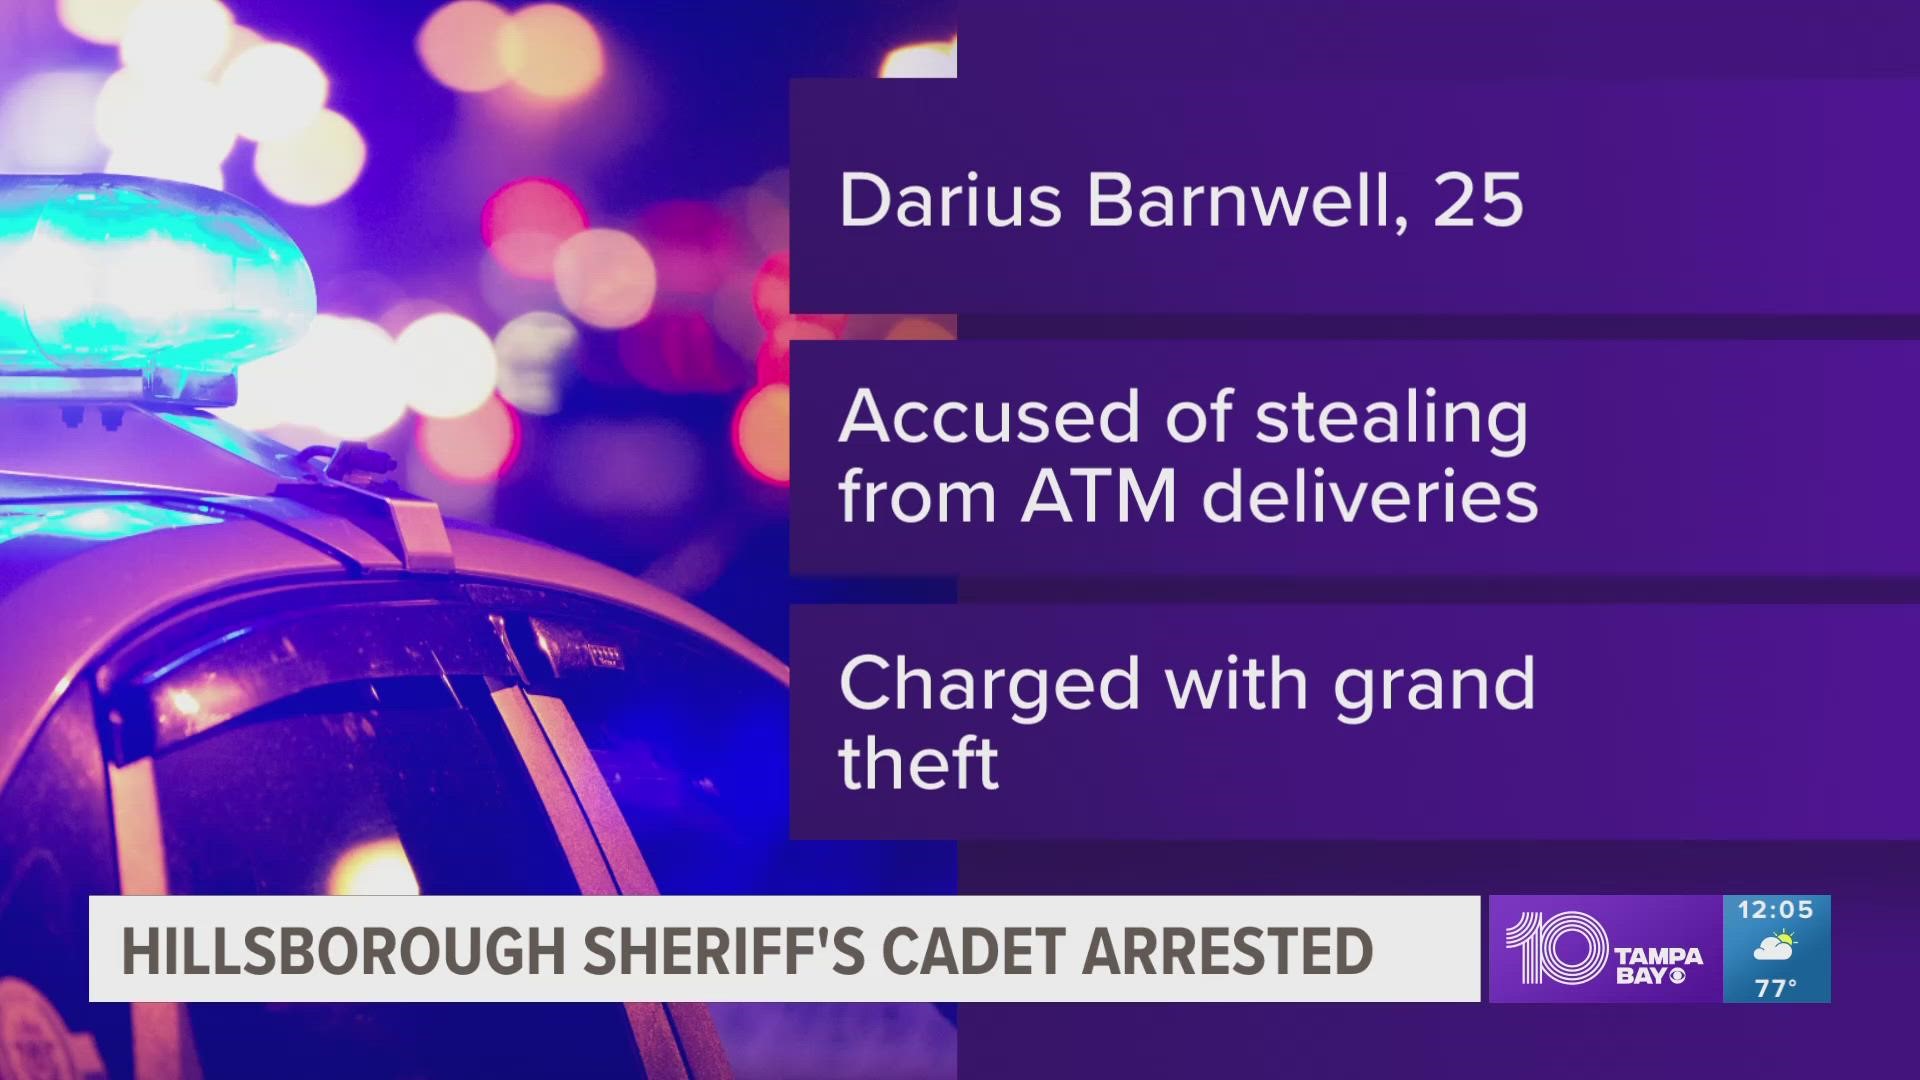 On Darius Barnwell's second day in the academy, detectives learned he was possibly involved in criminal activity, the sheriff's office said.